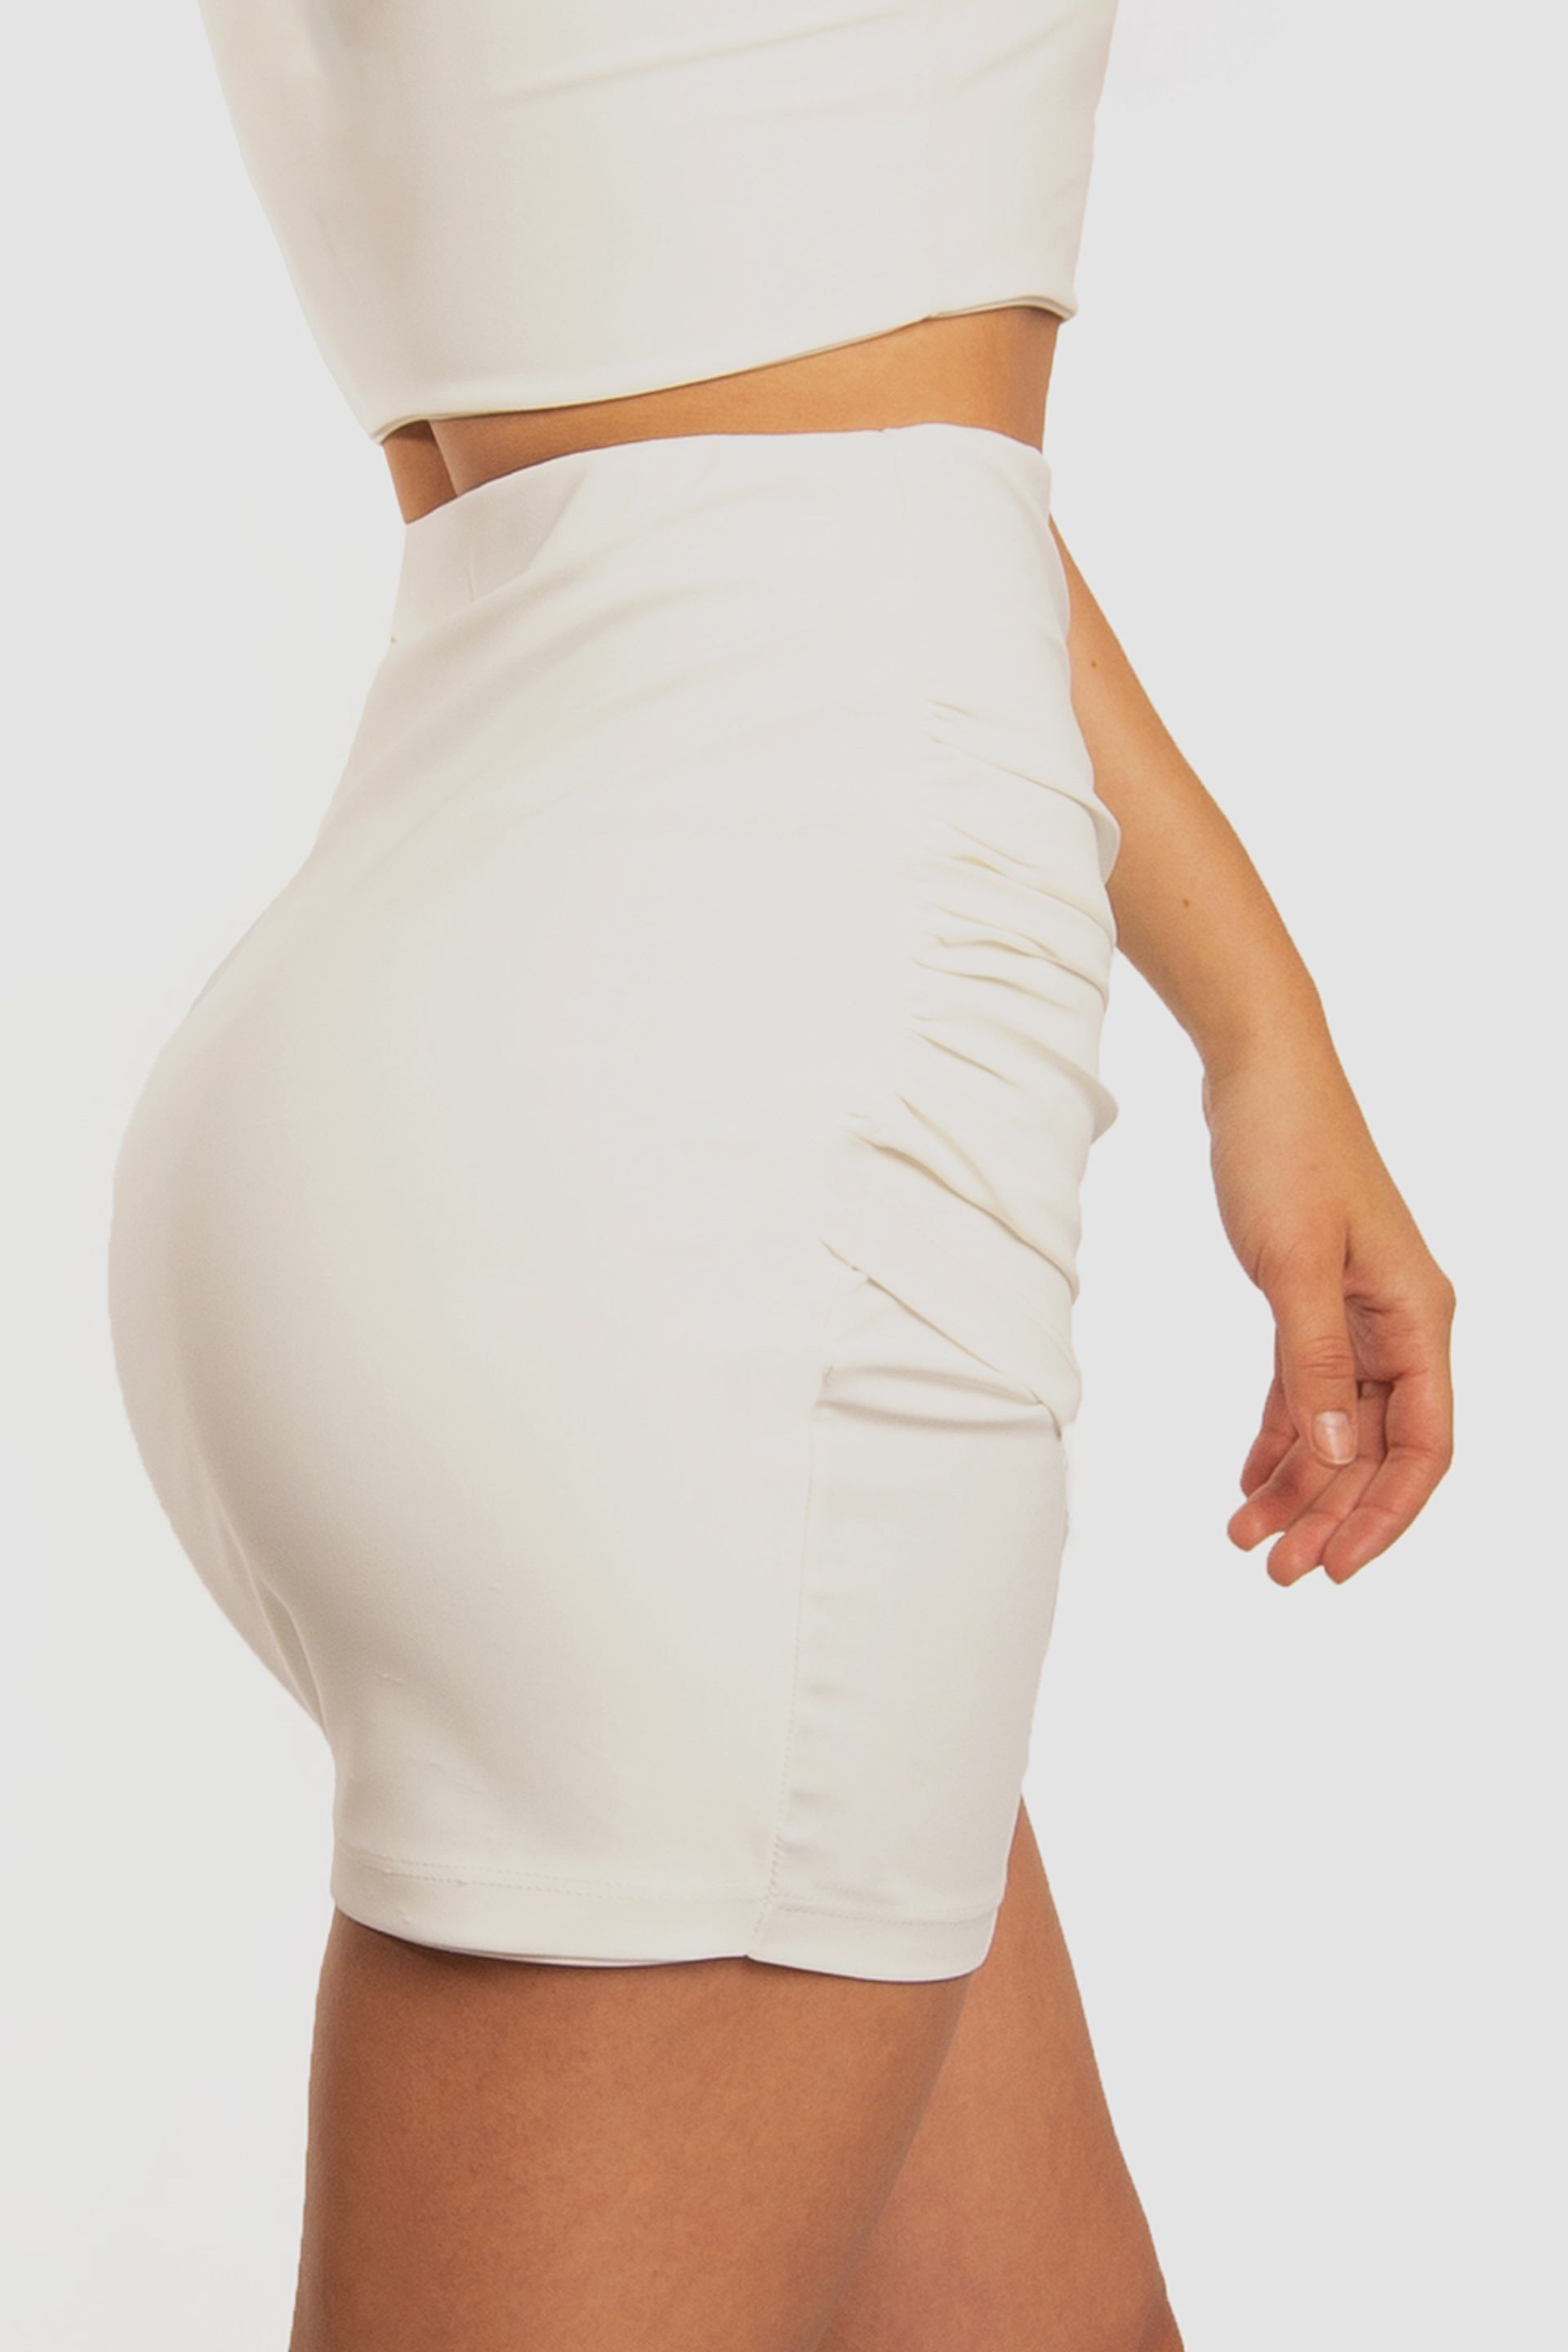 A woman is wearing a white crop top and a white skirt